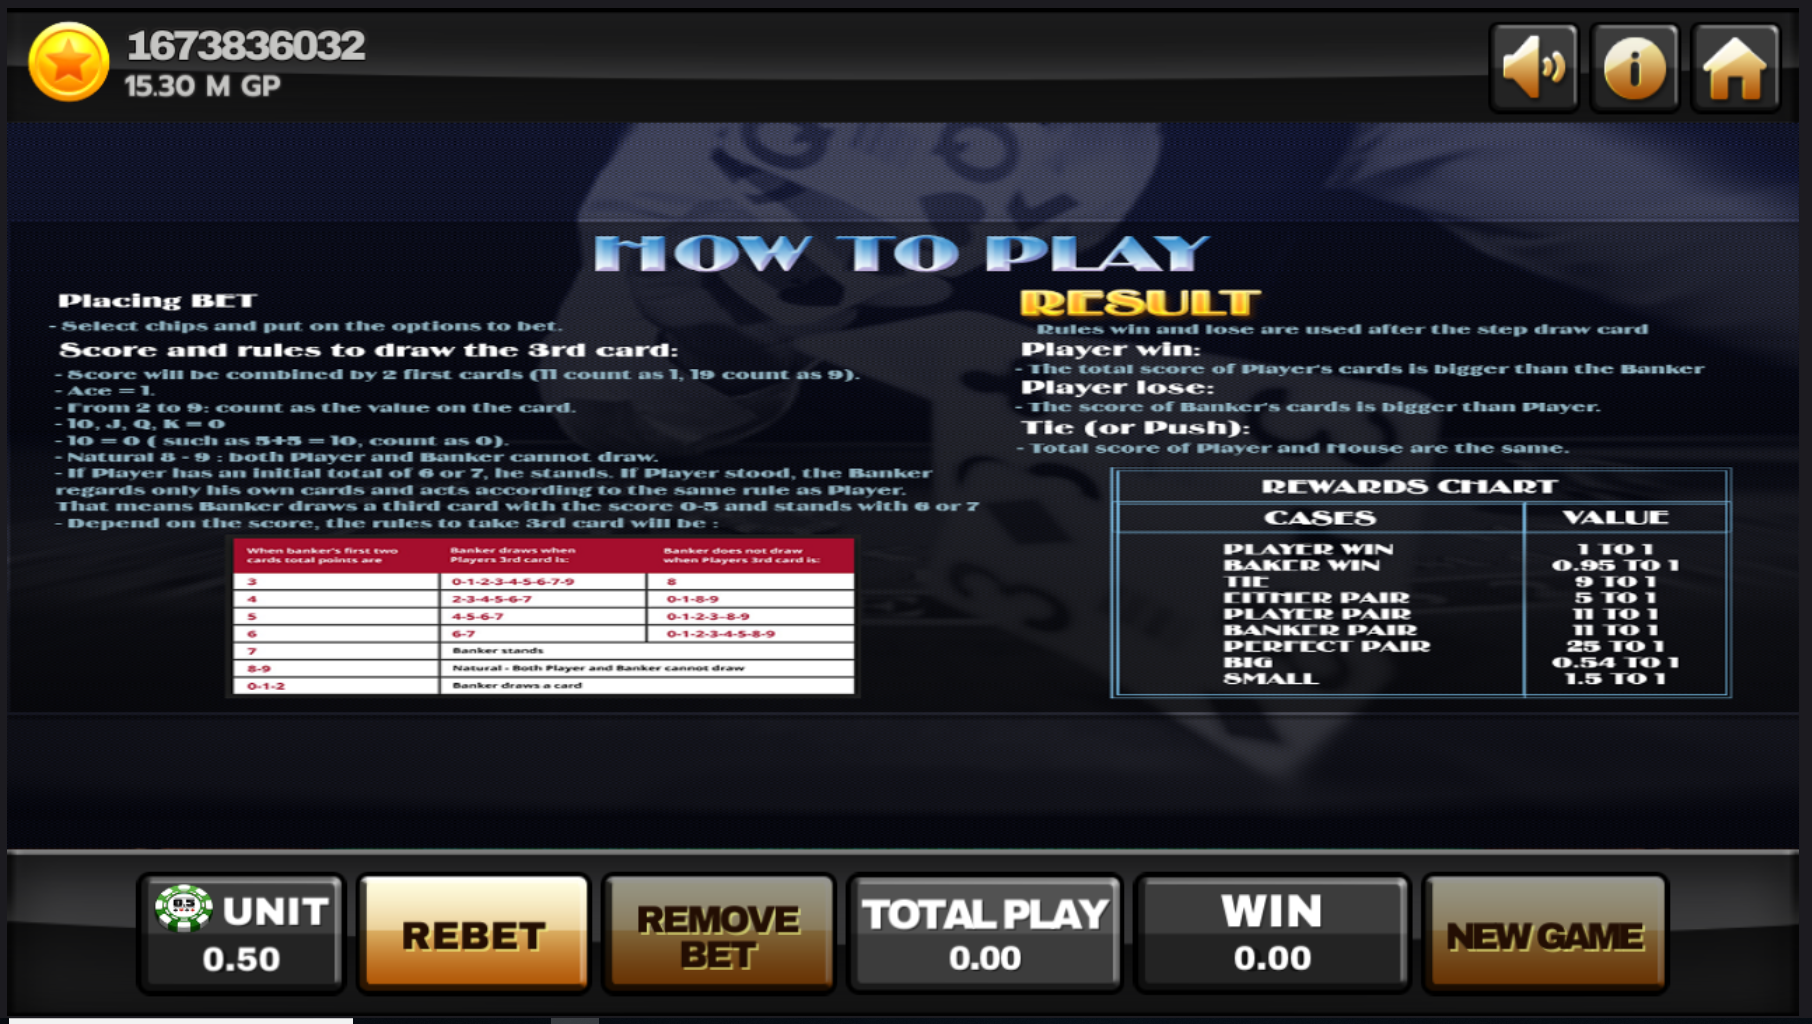 BACCARAT_6.png - 2.09 MB